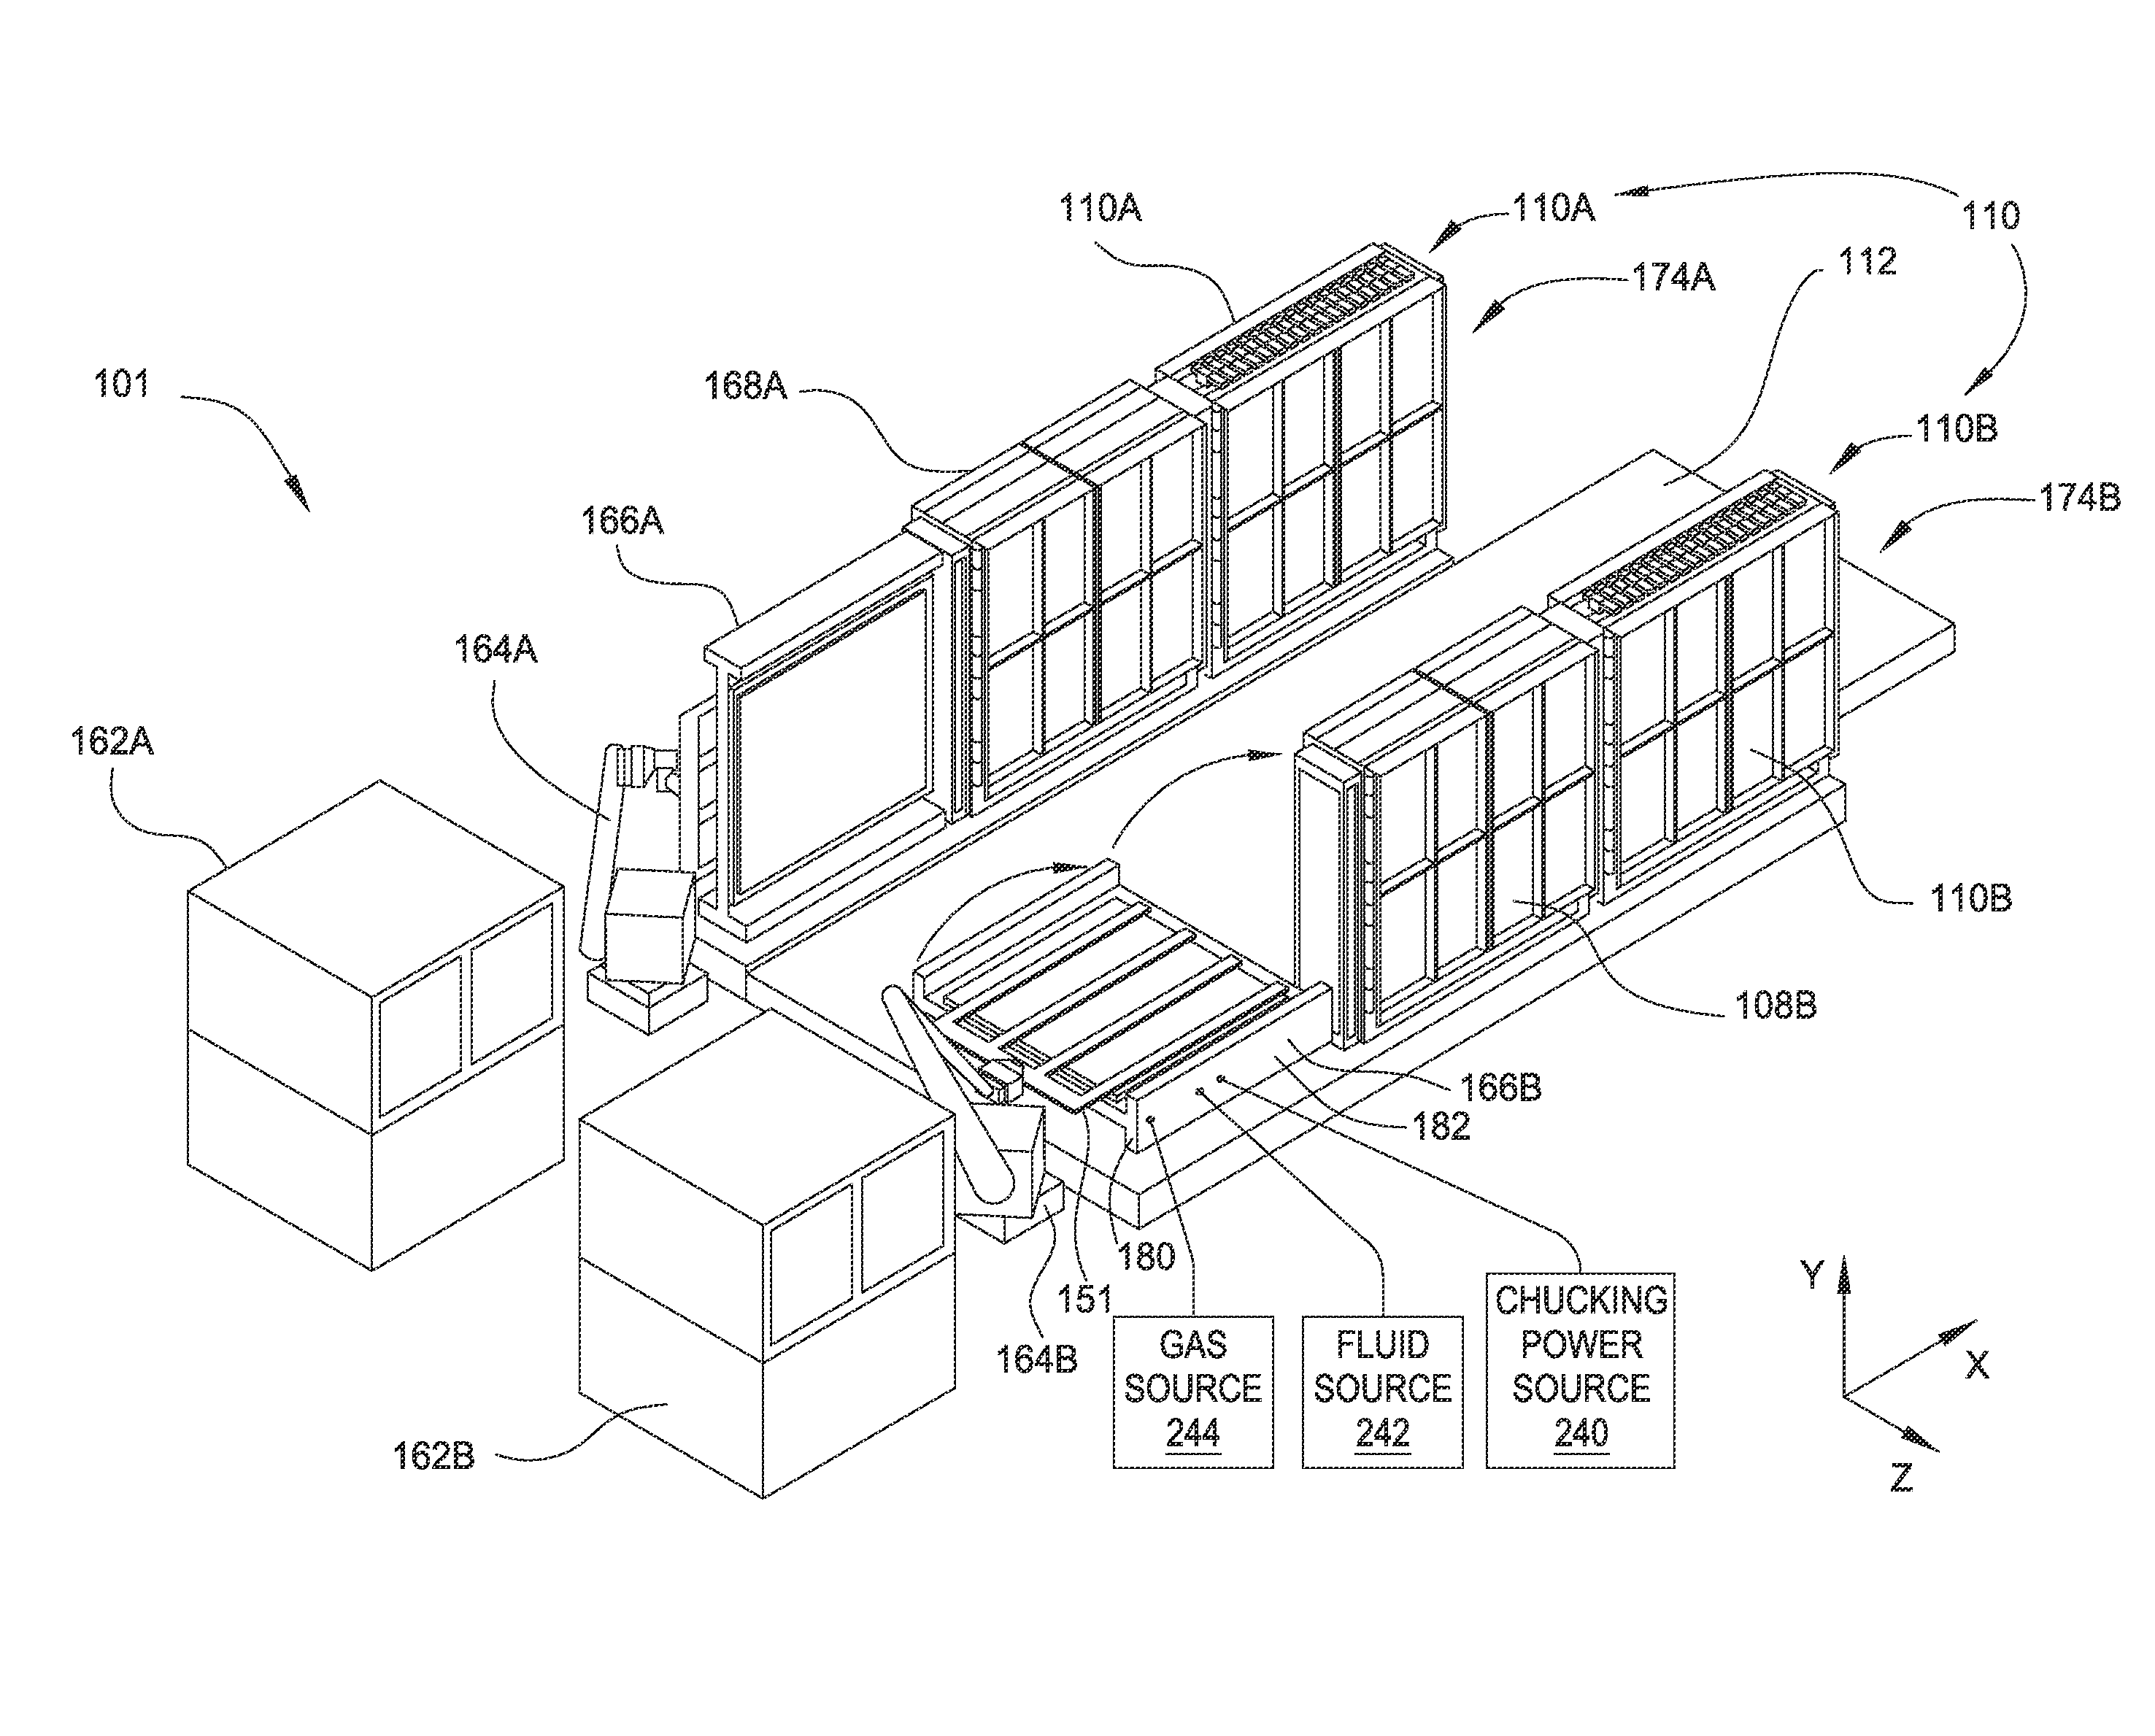 Substrate carrier with integrated electrostatic chuck